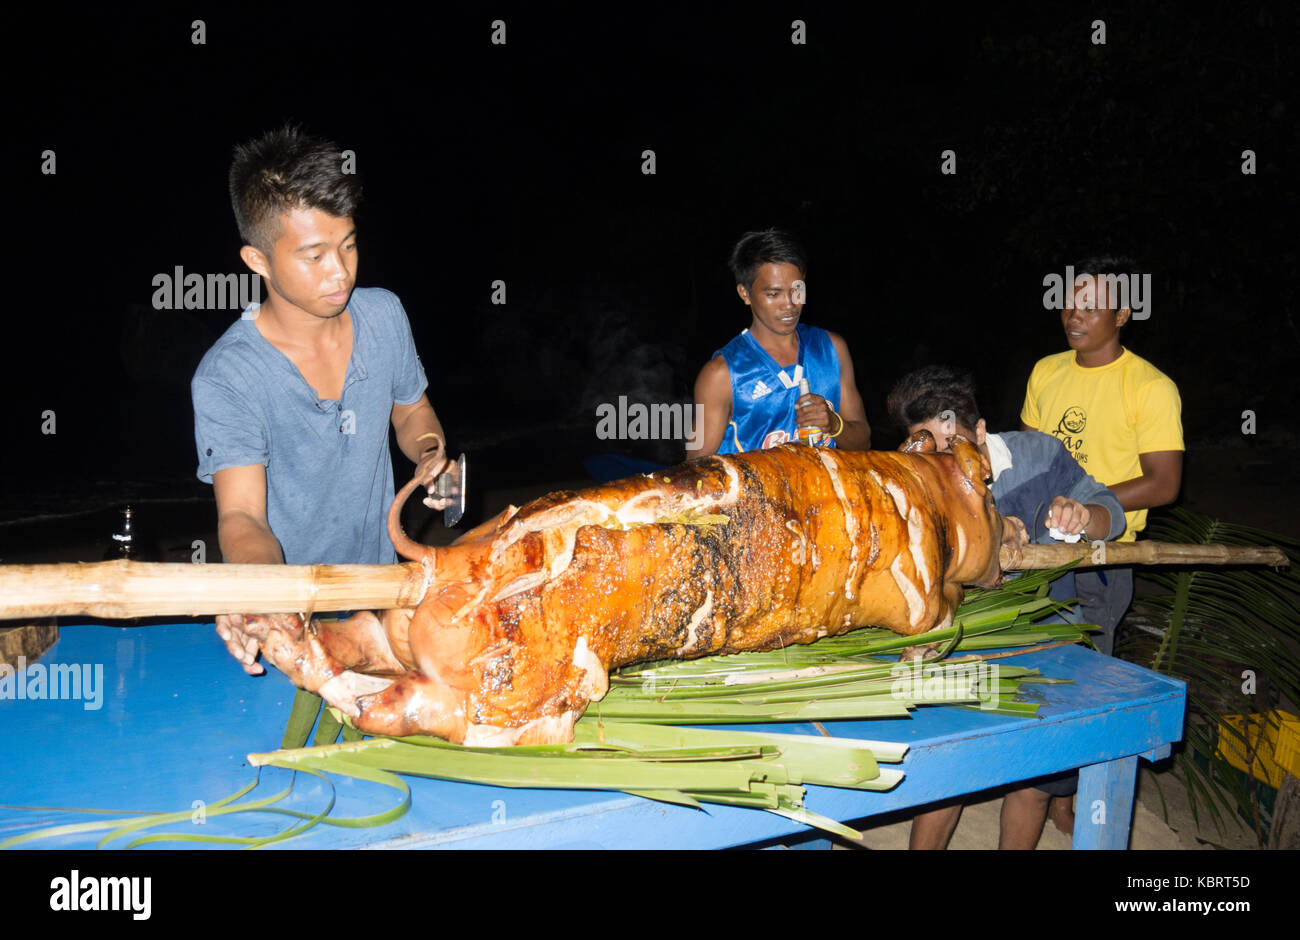 Philippines food preparation - holiday staff preparing a hog roast barbecue on the beach, El Nido, Palawan, Philippines Asia Stock Photo